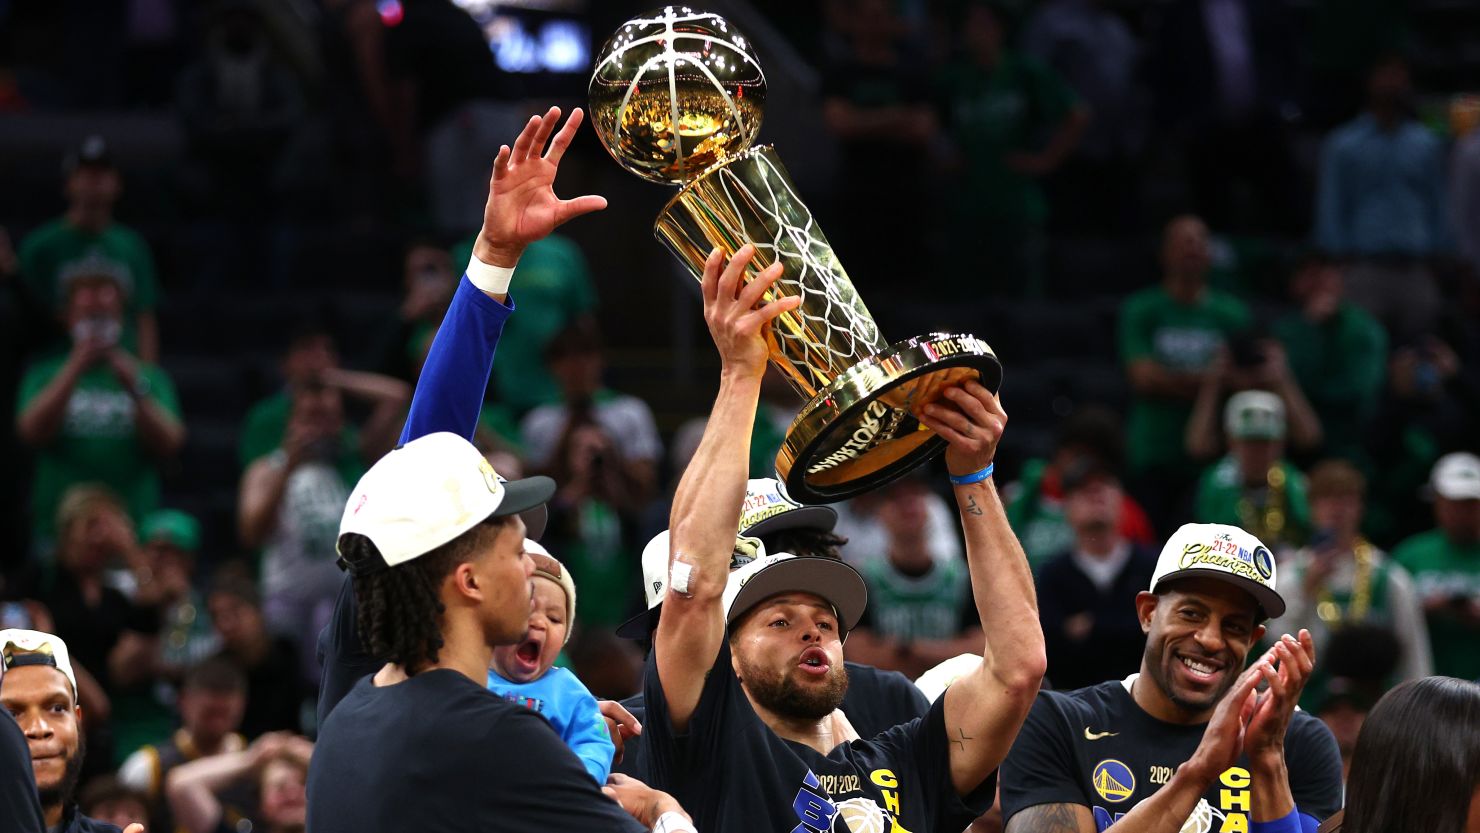 Golden State defeats the Boston Celtics to win the NBA